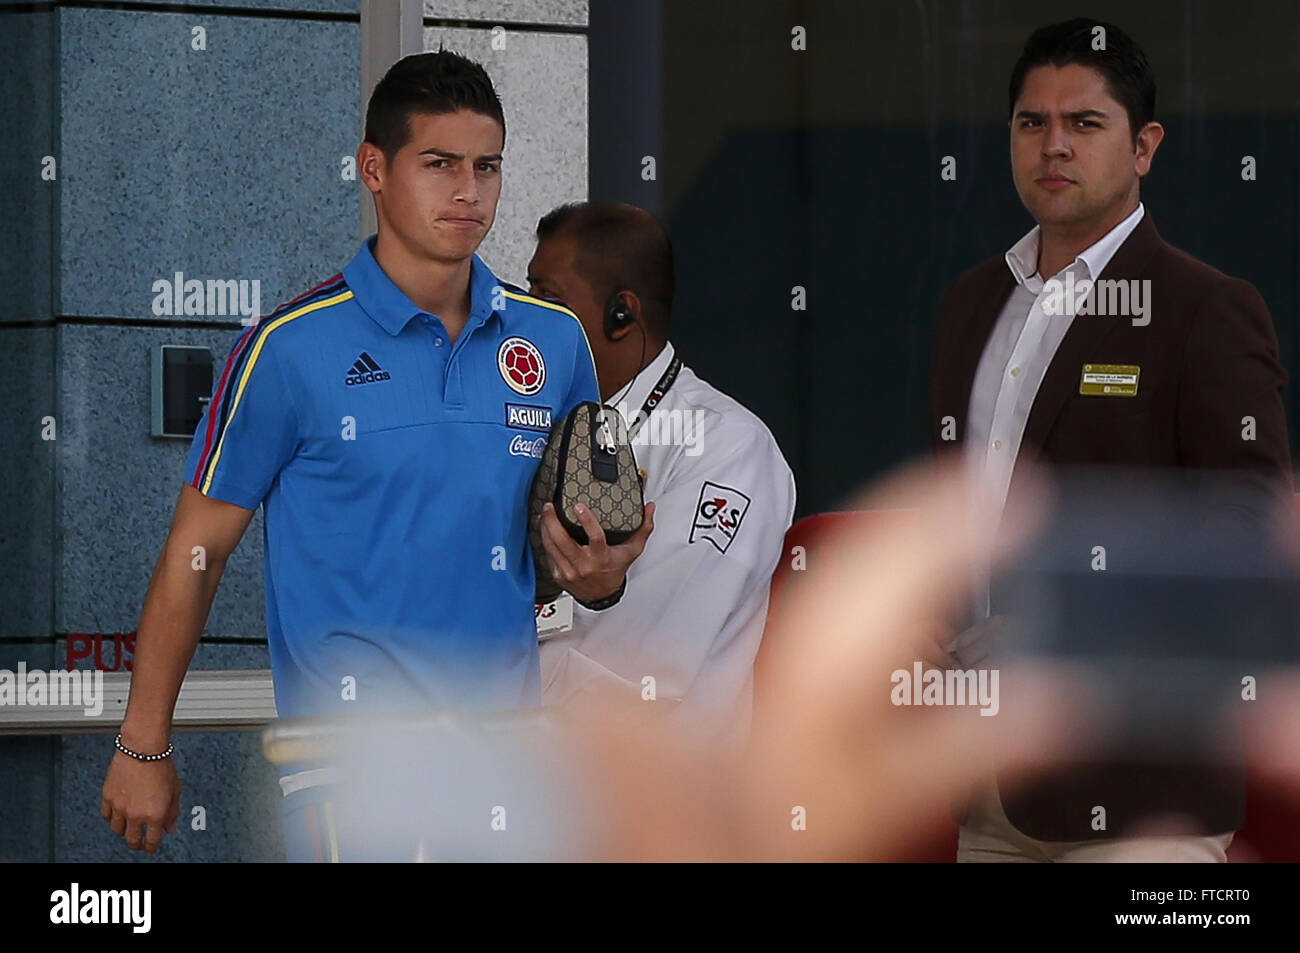 Barranquilla, Colombia. 27th Mar, 2016. James Rodriguez (L) of Colombia's National Team attends a training session in Barranquilla, Colombia, on March 27, 2016. Colombia will face Ecuador for a qualifying match of 2018 Russia World Cup on March 29. © Mauricio Alvarado/COLPRENSA/Xinhua/Alamy Live News Stock Photo